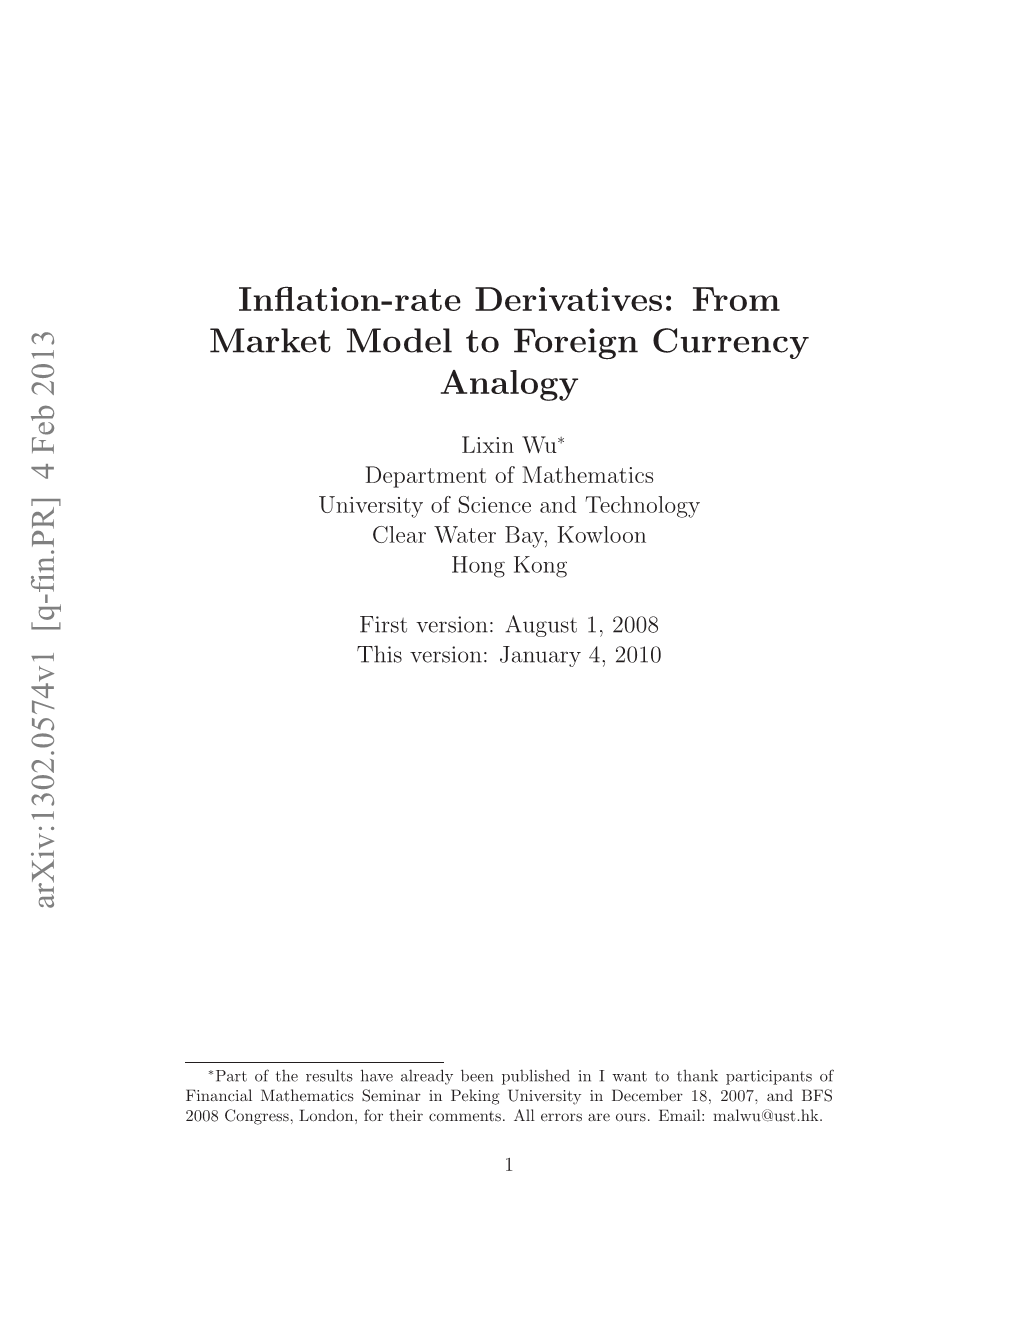 Inflation-Rate Derivatives: from Market Model to Foreign Currency Analogy